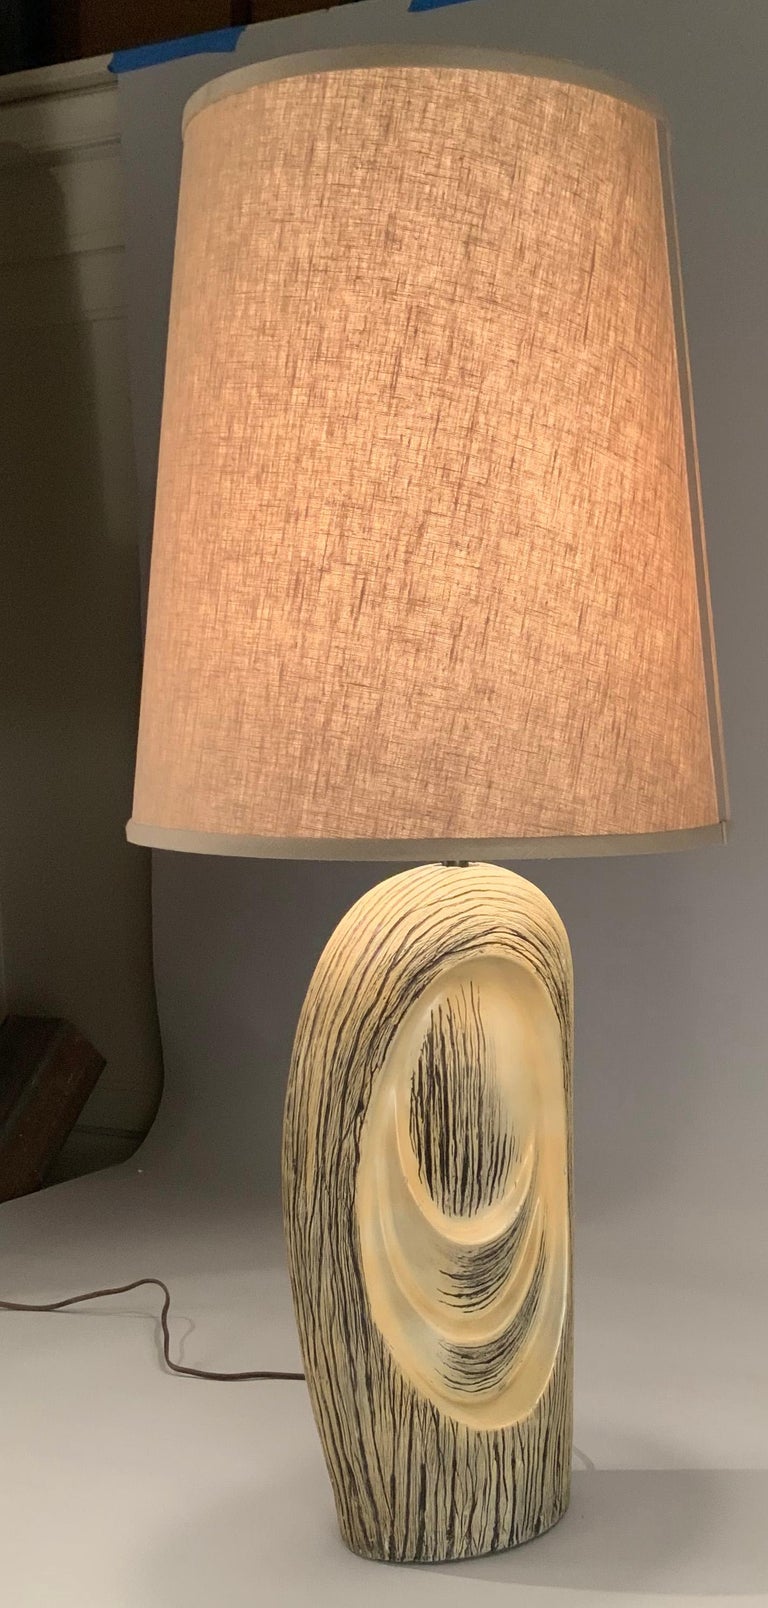 A very nice modern 1950's glazed ceramic lamp, made to look like the trunk of a tree - faux bois! beautiful design, color, and scale. excellent condition, along with a new shade in sand colored linen.